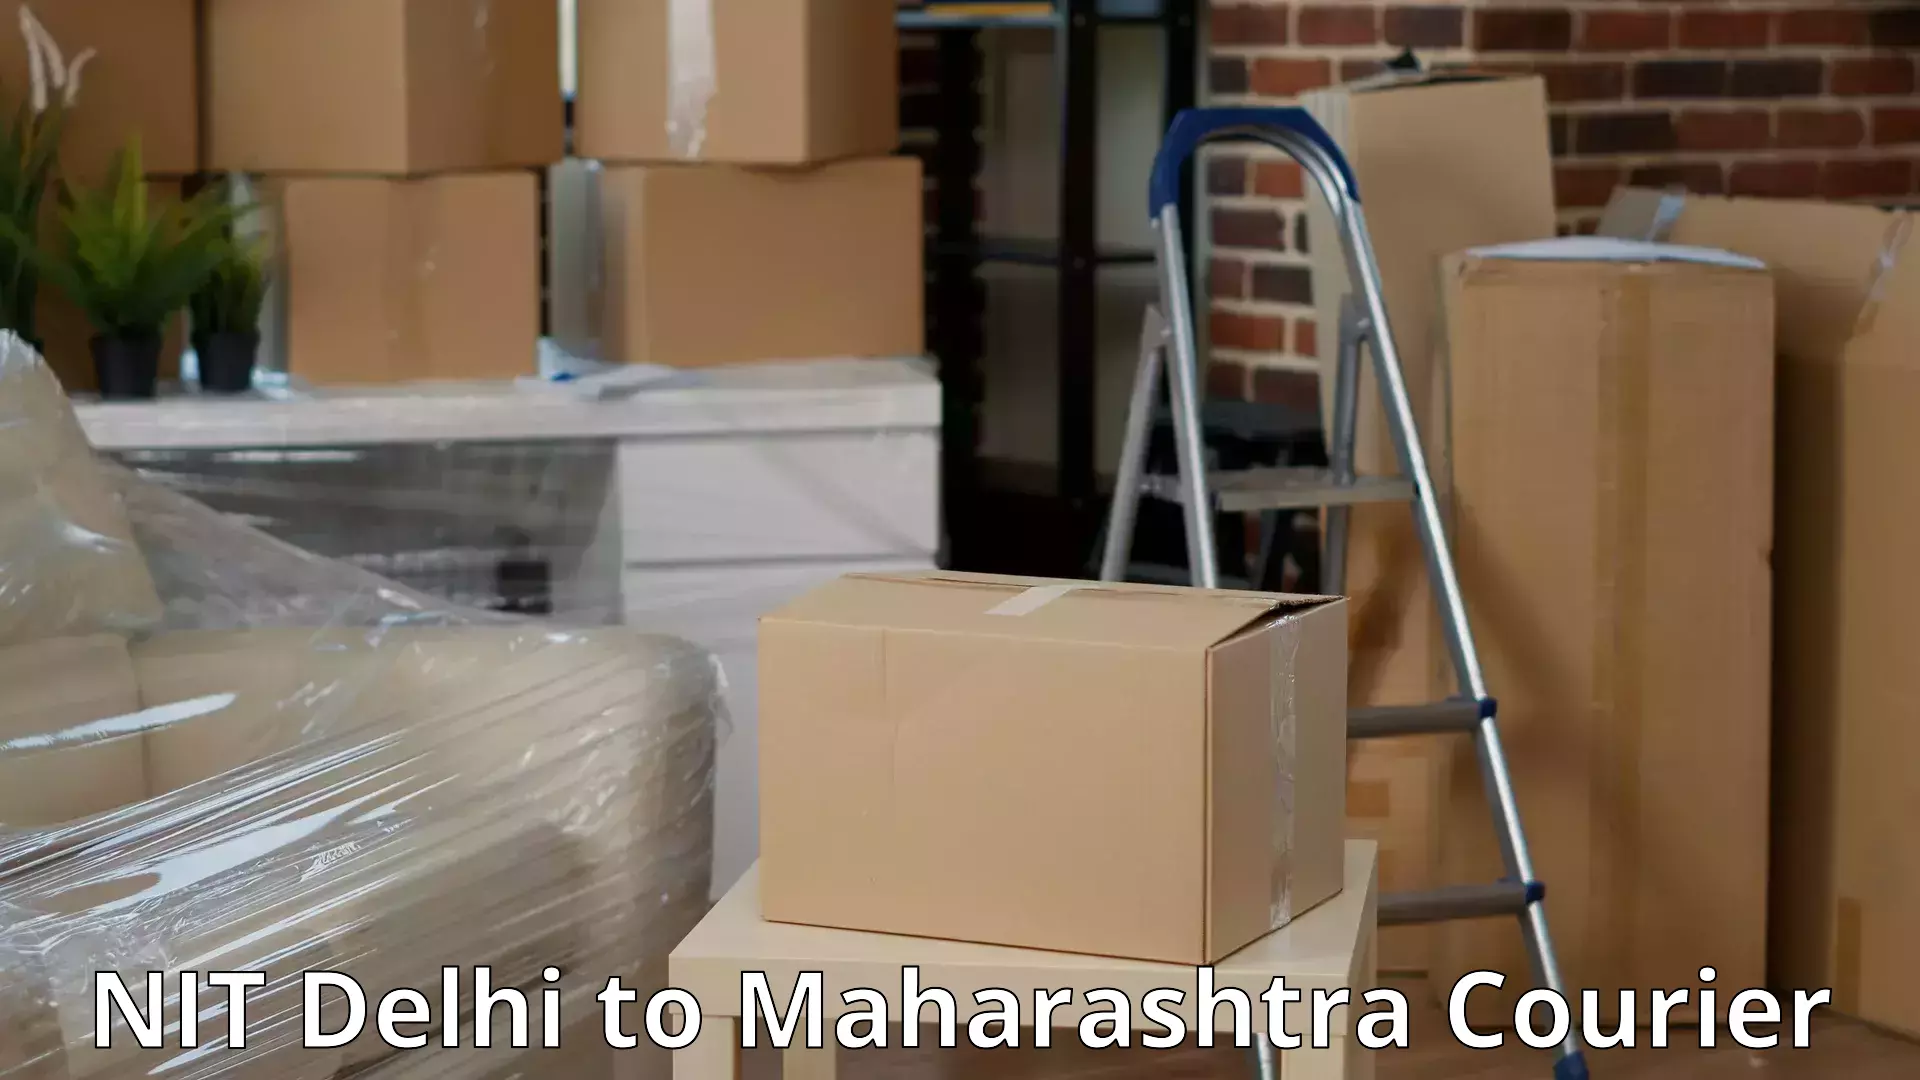 Quality relocation services in NIT Delhi to Bhiwandi